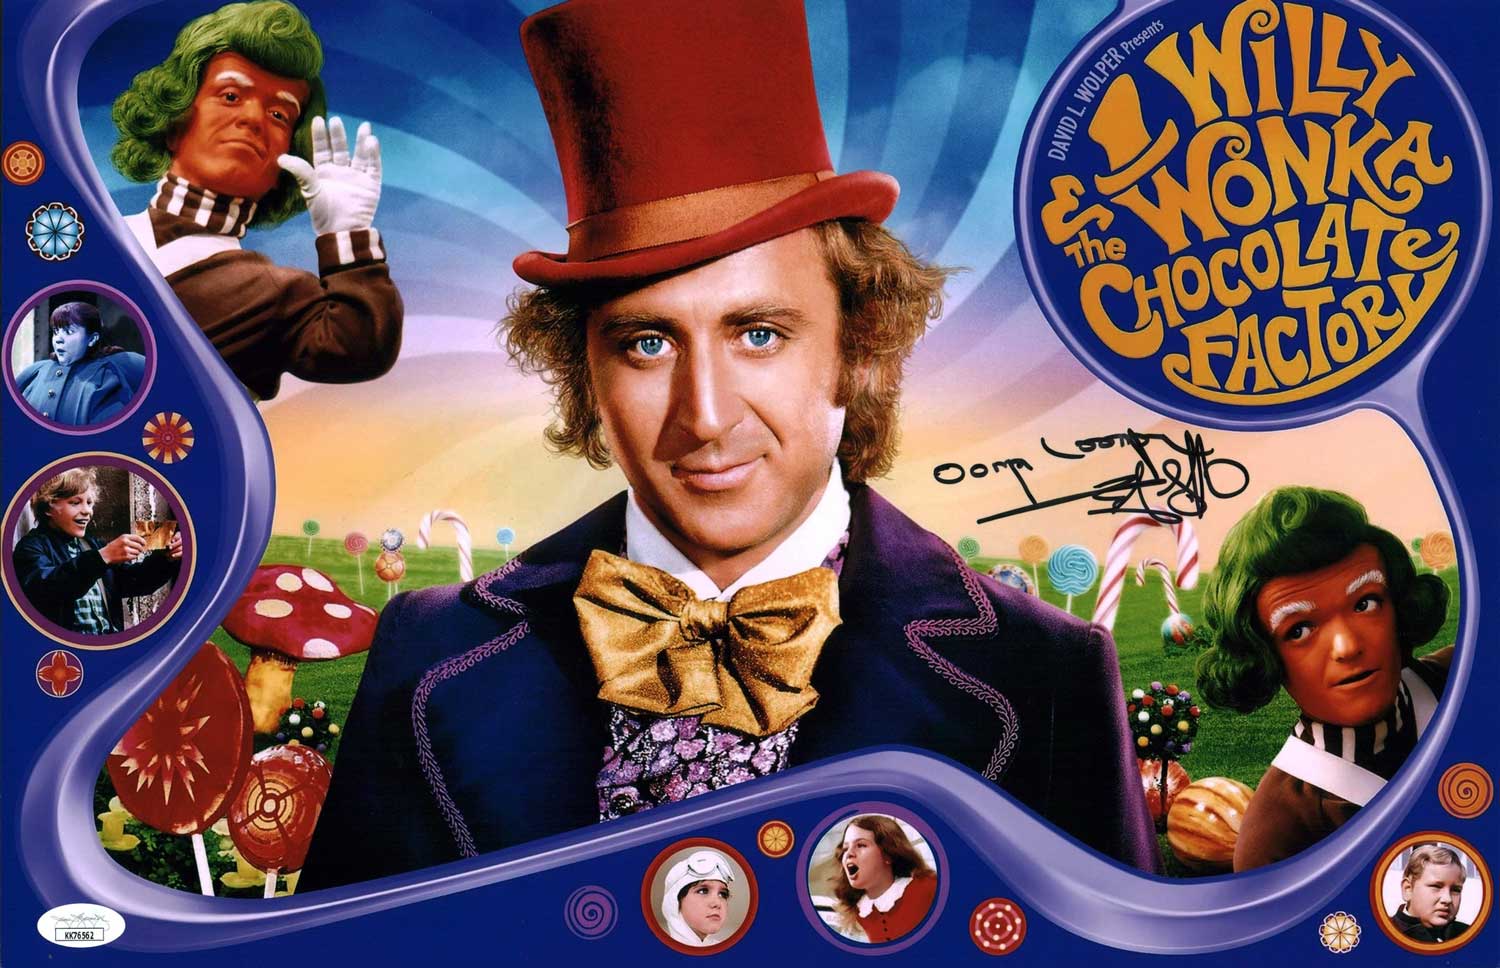 Rusty Goffe Willy Wonka 11x17 Photo Poster Signed Autograph JSA Certified COA Auto GalaxyCon